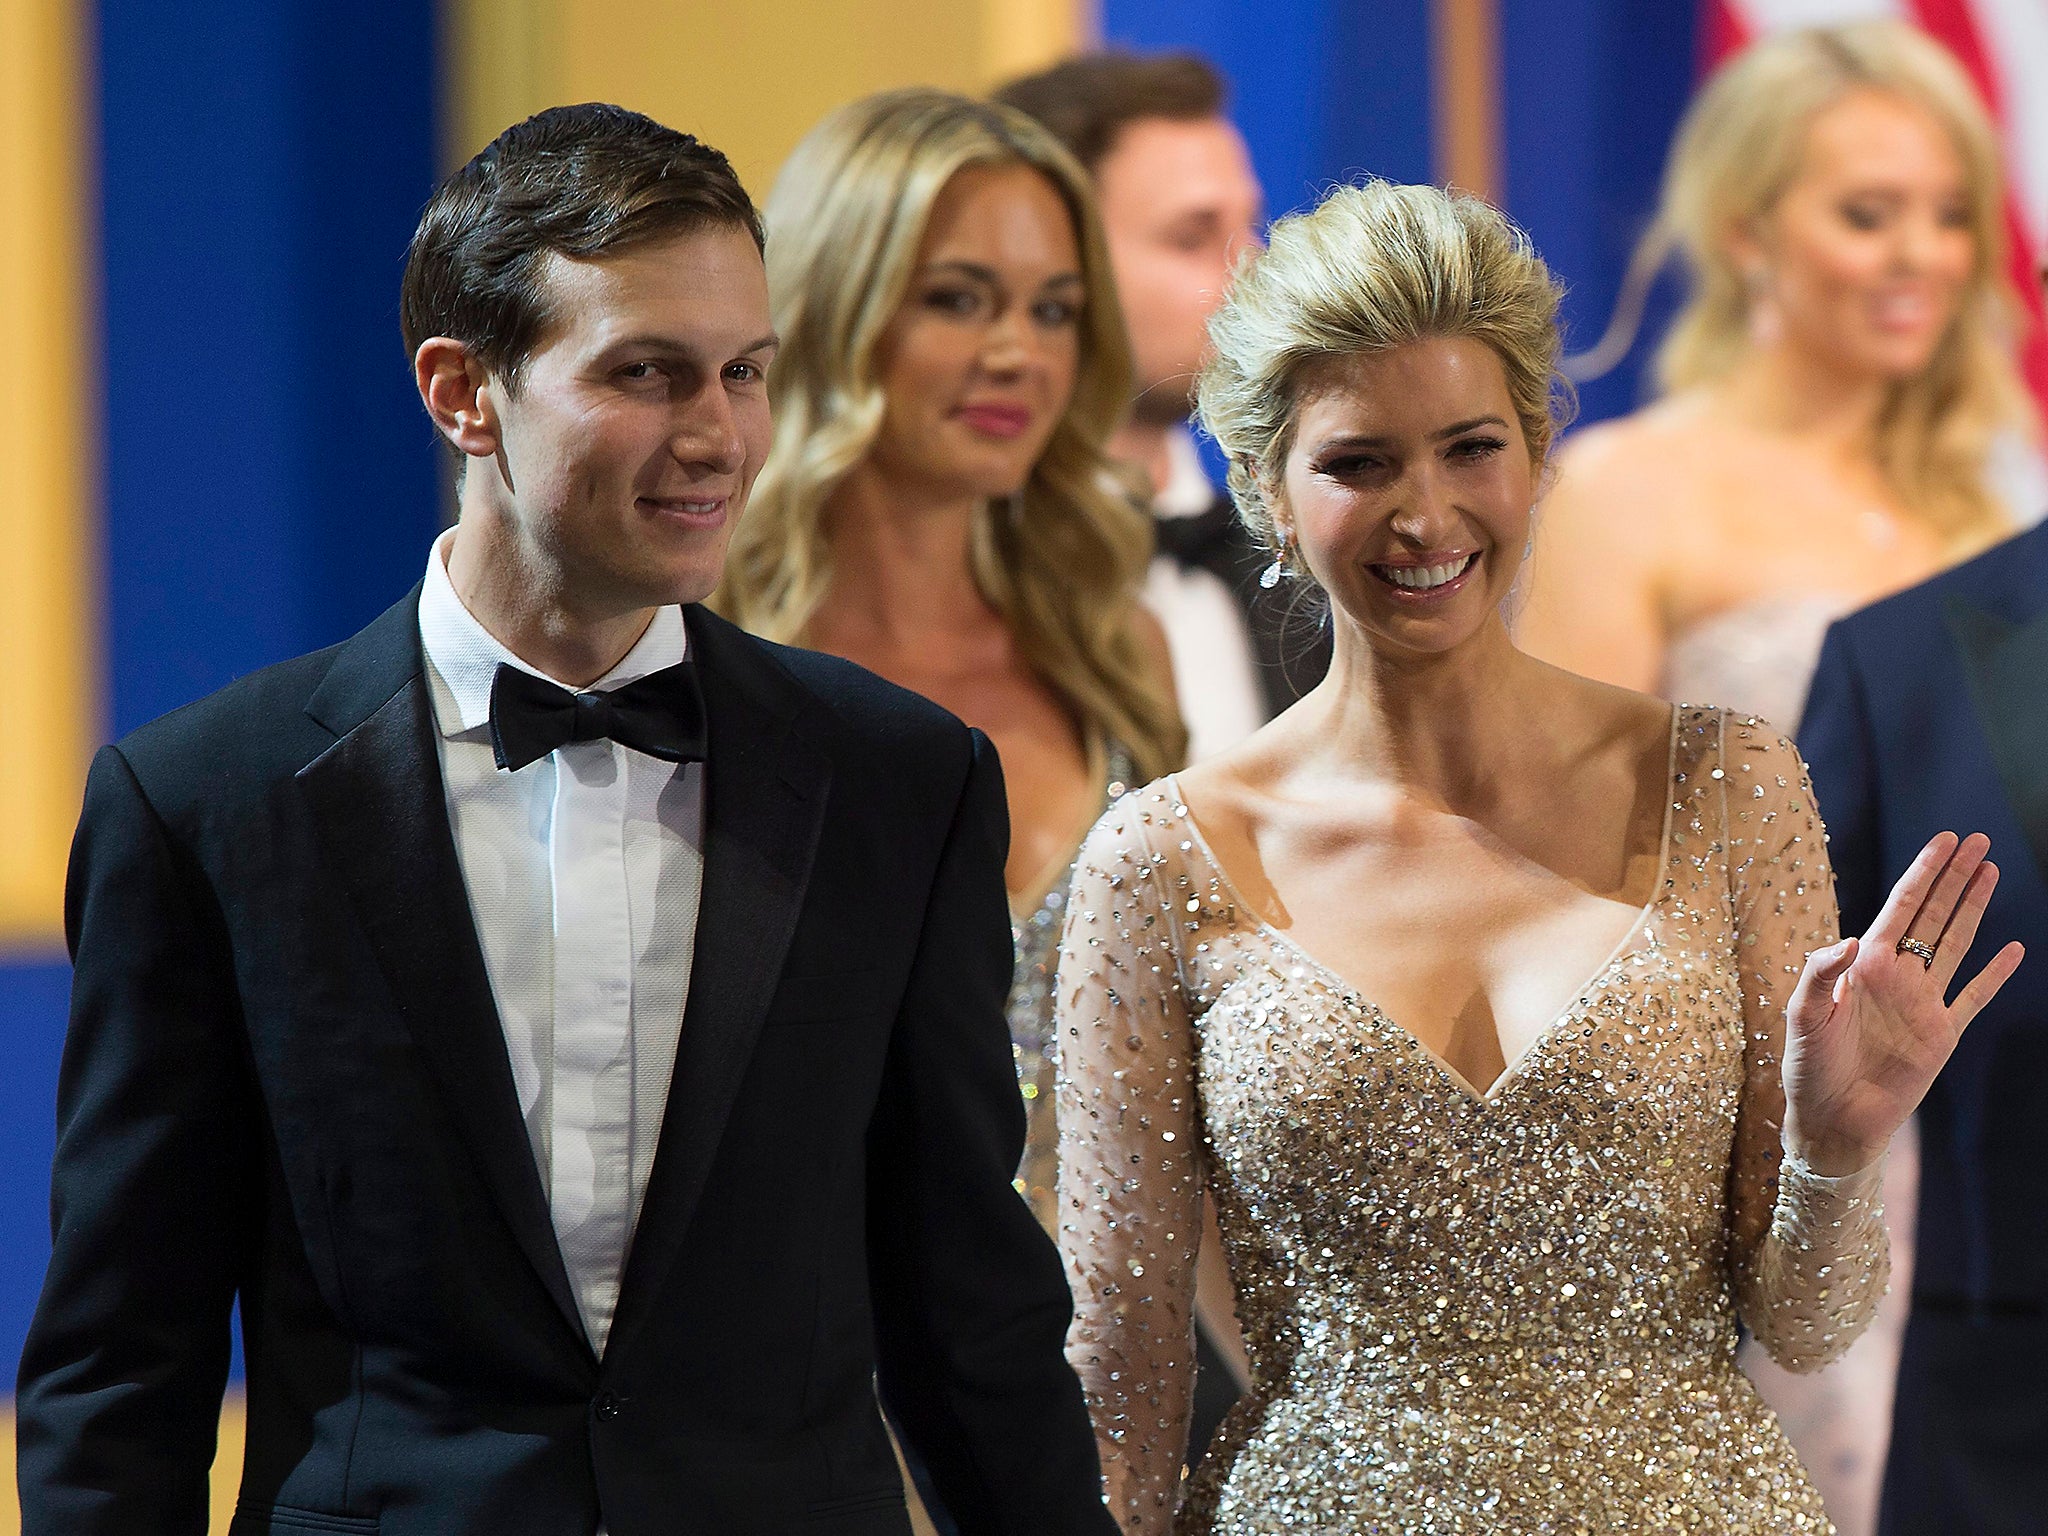 Ivanka Trump and her husband Jared Kushner at a presidential inauguration ball. Hours later Jared's brother Joshua was "observing" the anti-Donald Trump Women's March